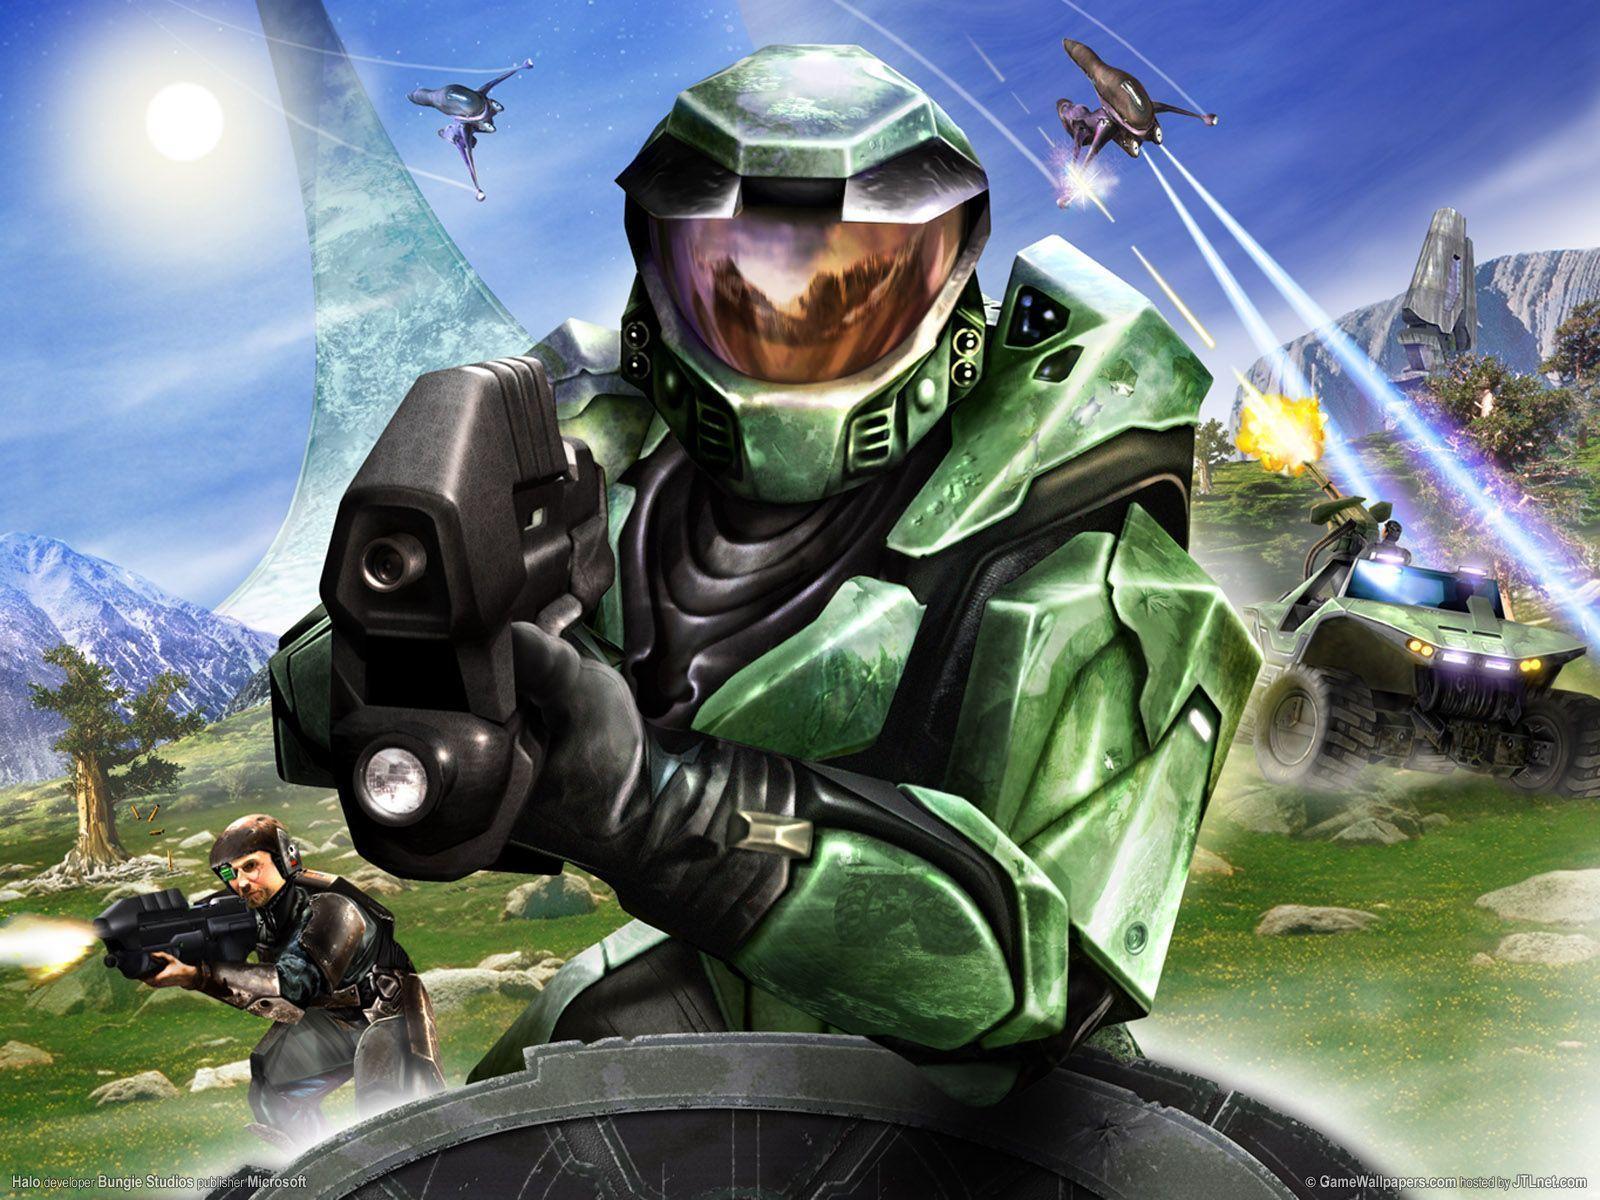 Halo: Combat Evolved Wallpapers